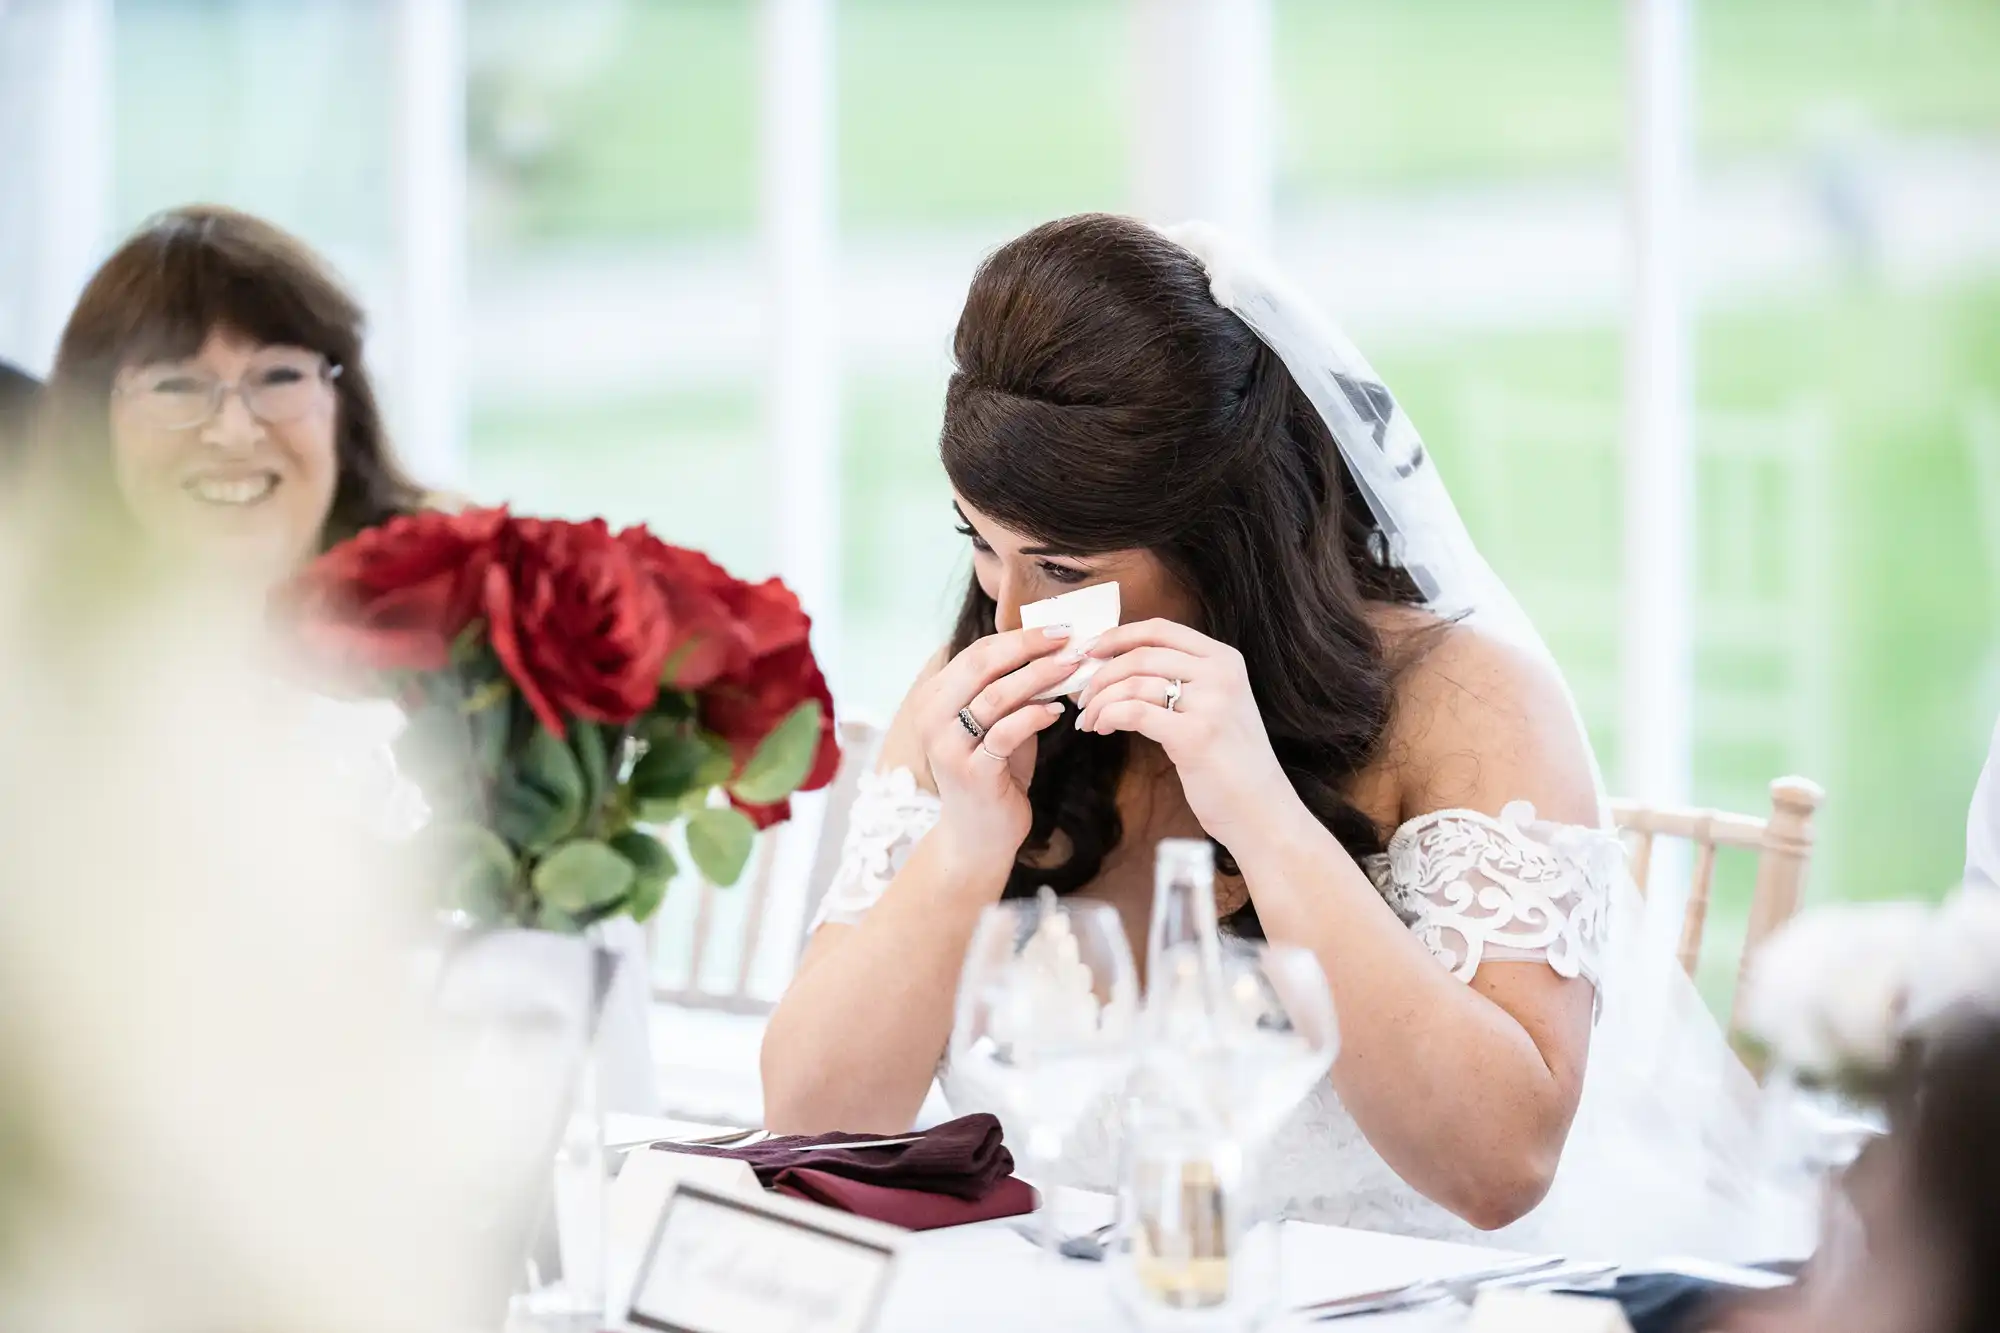 A bride wipes her tears with a tissue while sitting at a decorated reception table, flanked by guests.